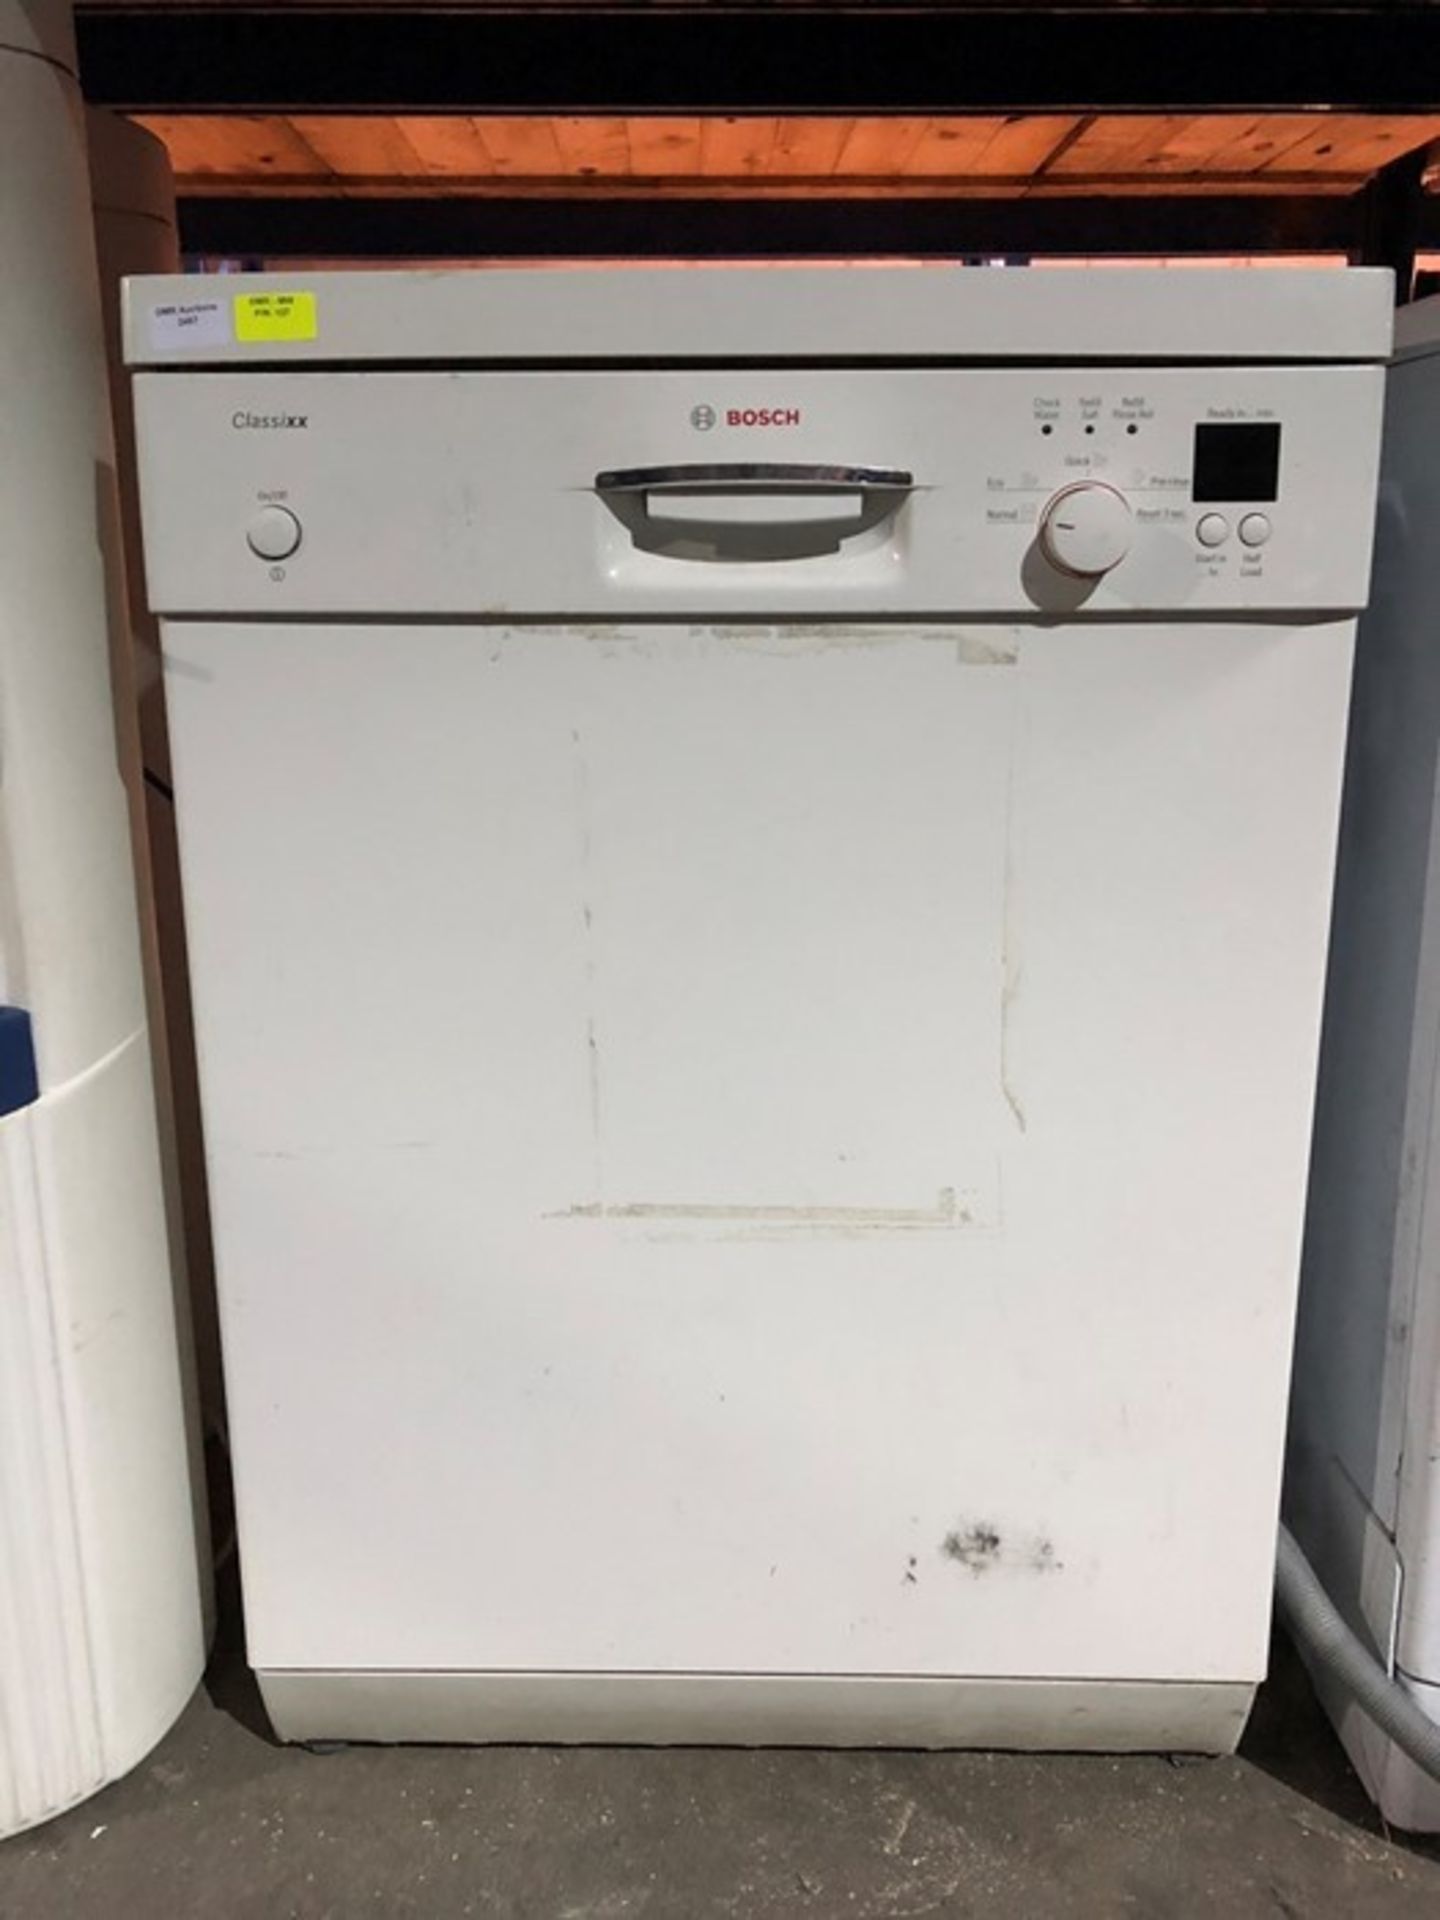 1 BOSCH CLASSIXX DISHWASHER / RRP £299.99 (PUBLIC VIEWING AVAILABLE)